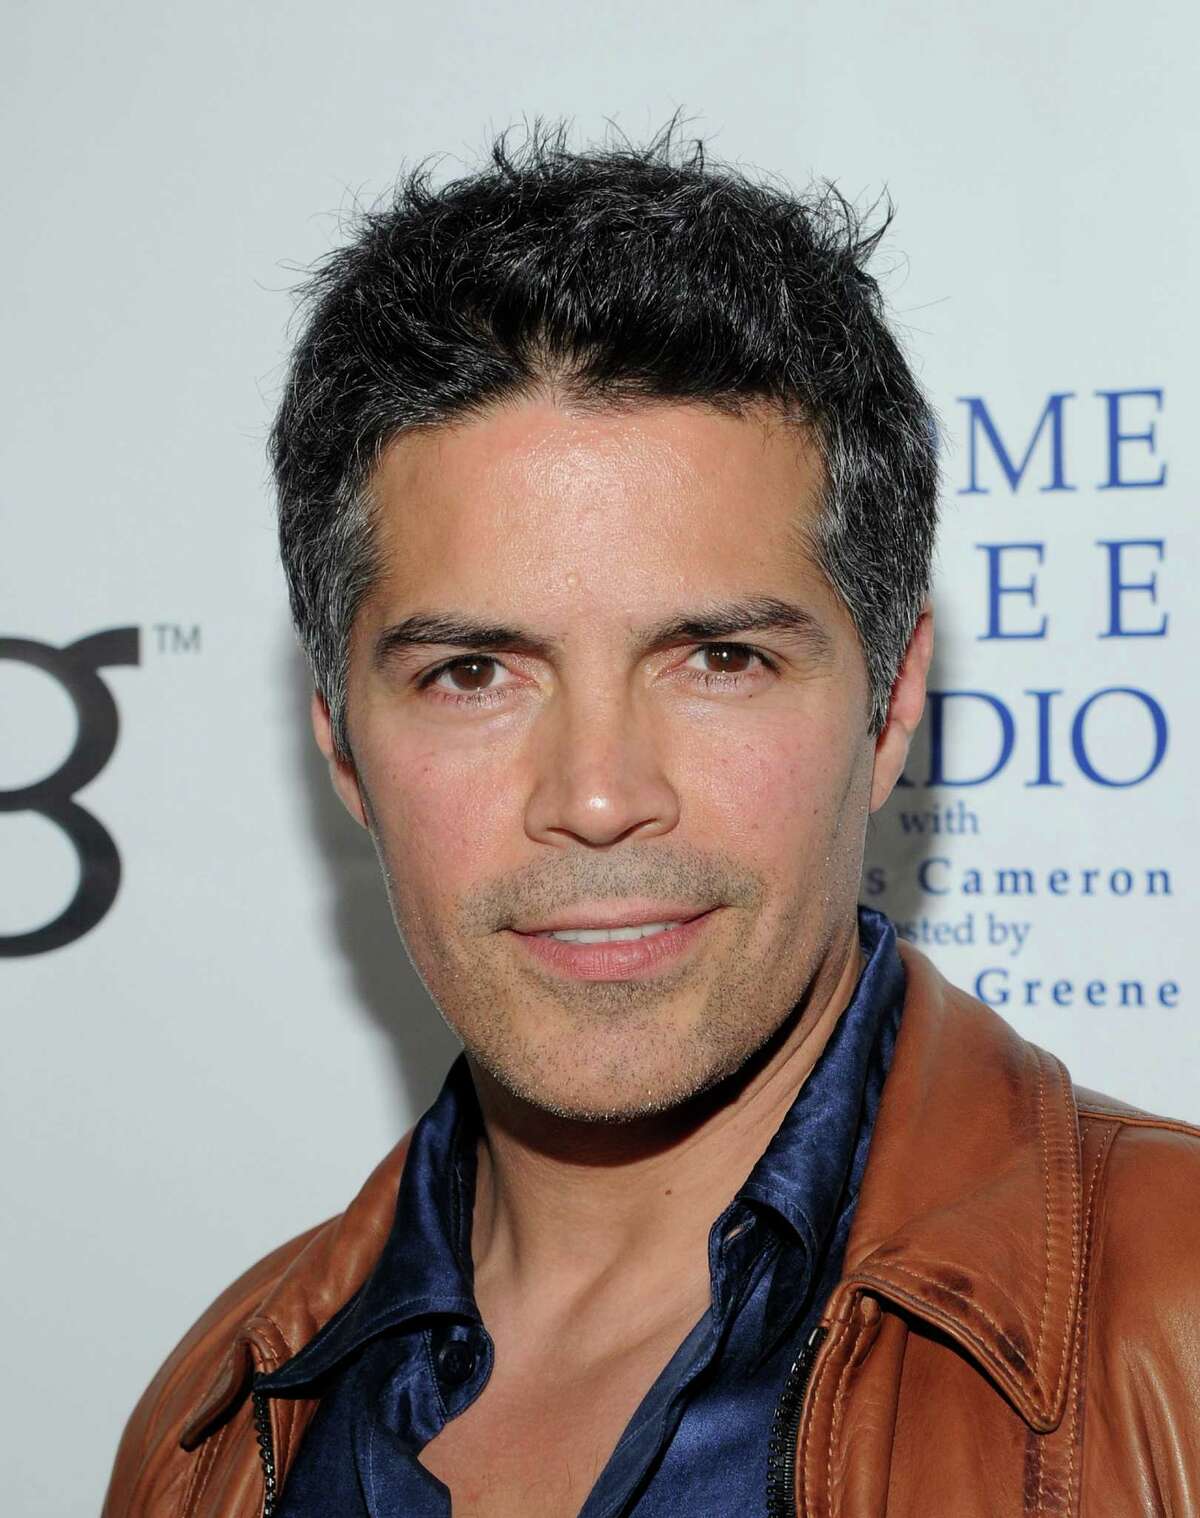 LOS ANGELES, CA - APRIL 22: Actor Esai Morales attends the Earth Day celebration and screening of Avatar benefitting the Partnership for Los Angeles Schools at Nokia Theatre L.A. Live on April 22, 2010 in Los Angeles, California. (Photo by Michael Buckner/Getty Images for Earth Day)